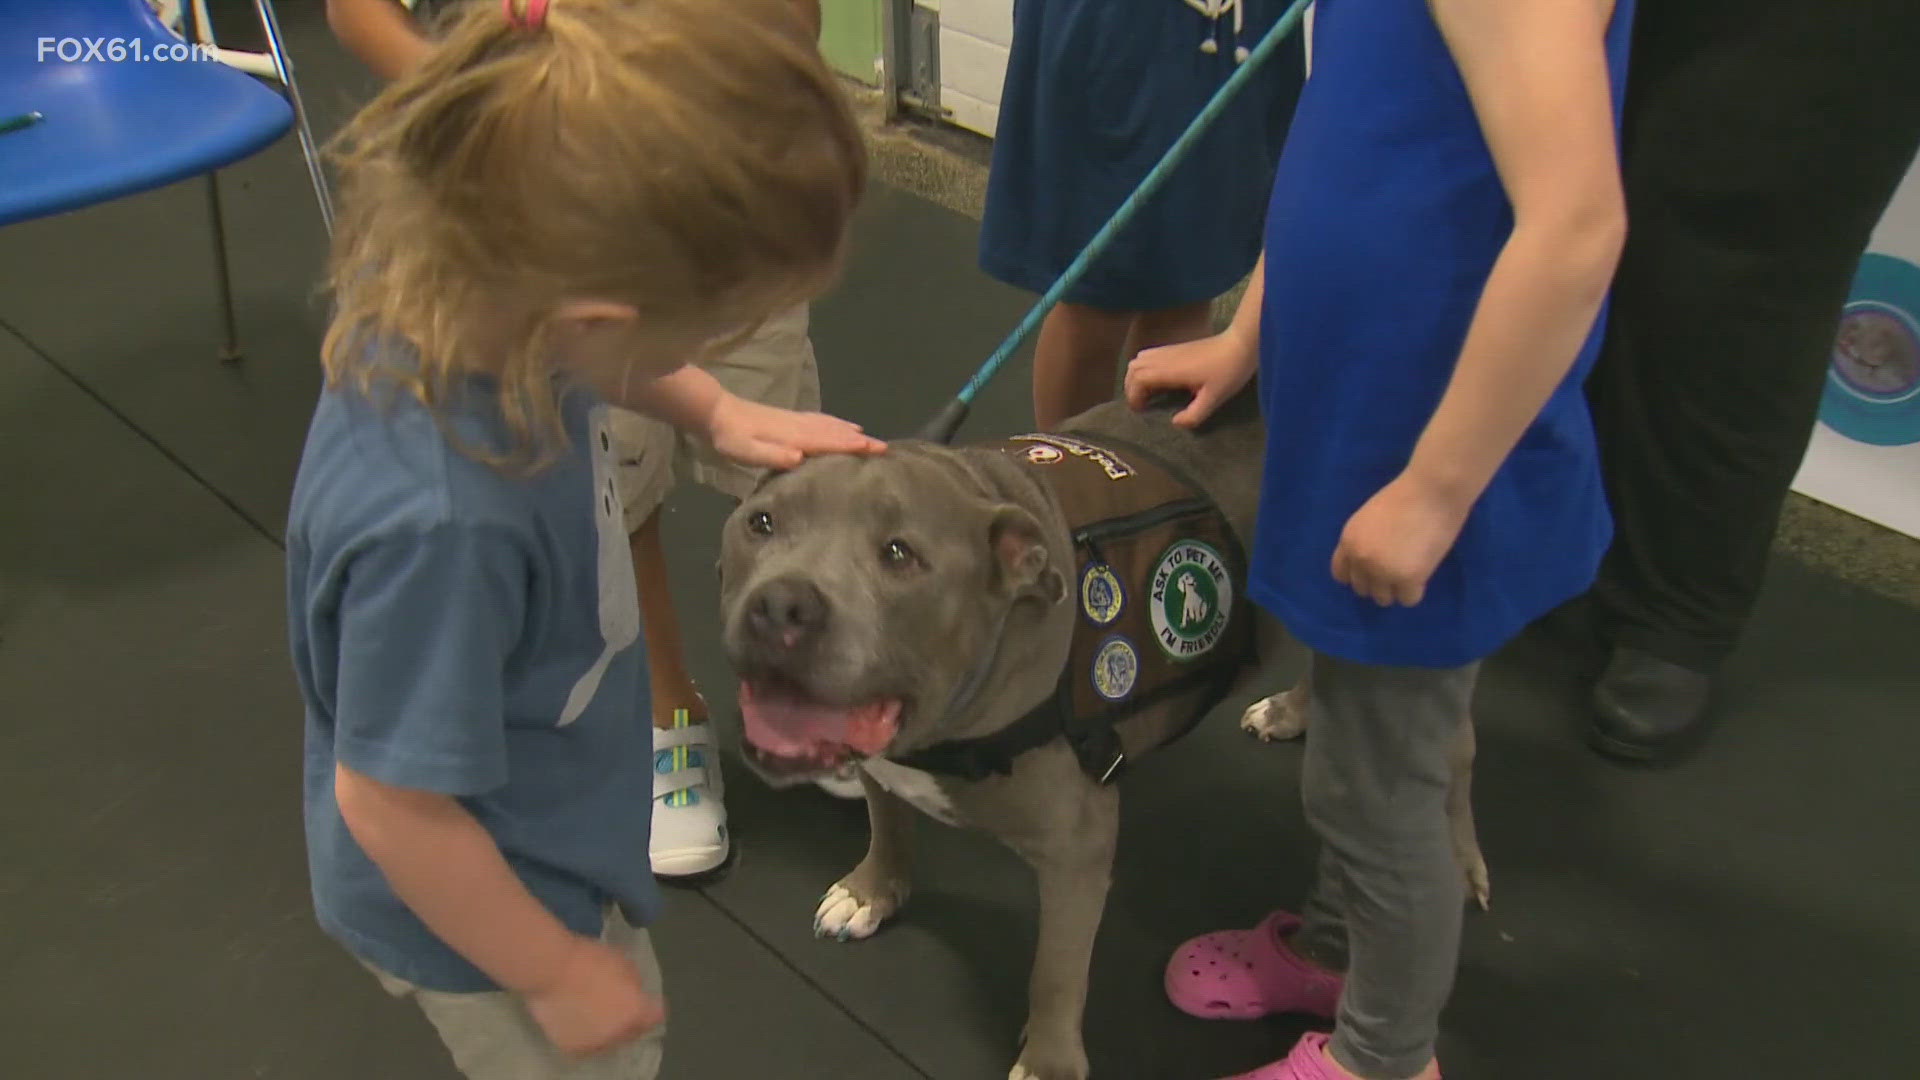 Jeffrey the "Positively Peaceful Pit Bull" was instrumental in the days following the shooting at Sandy Hook Elementary School. He officially retired Saturday.